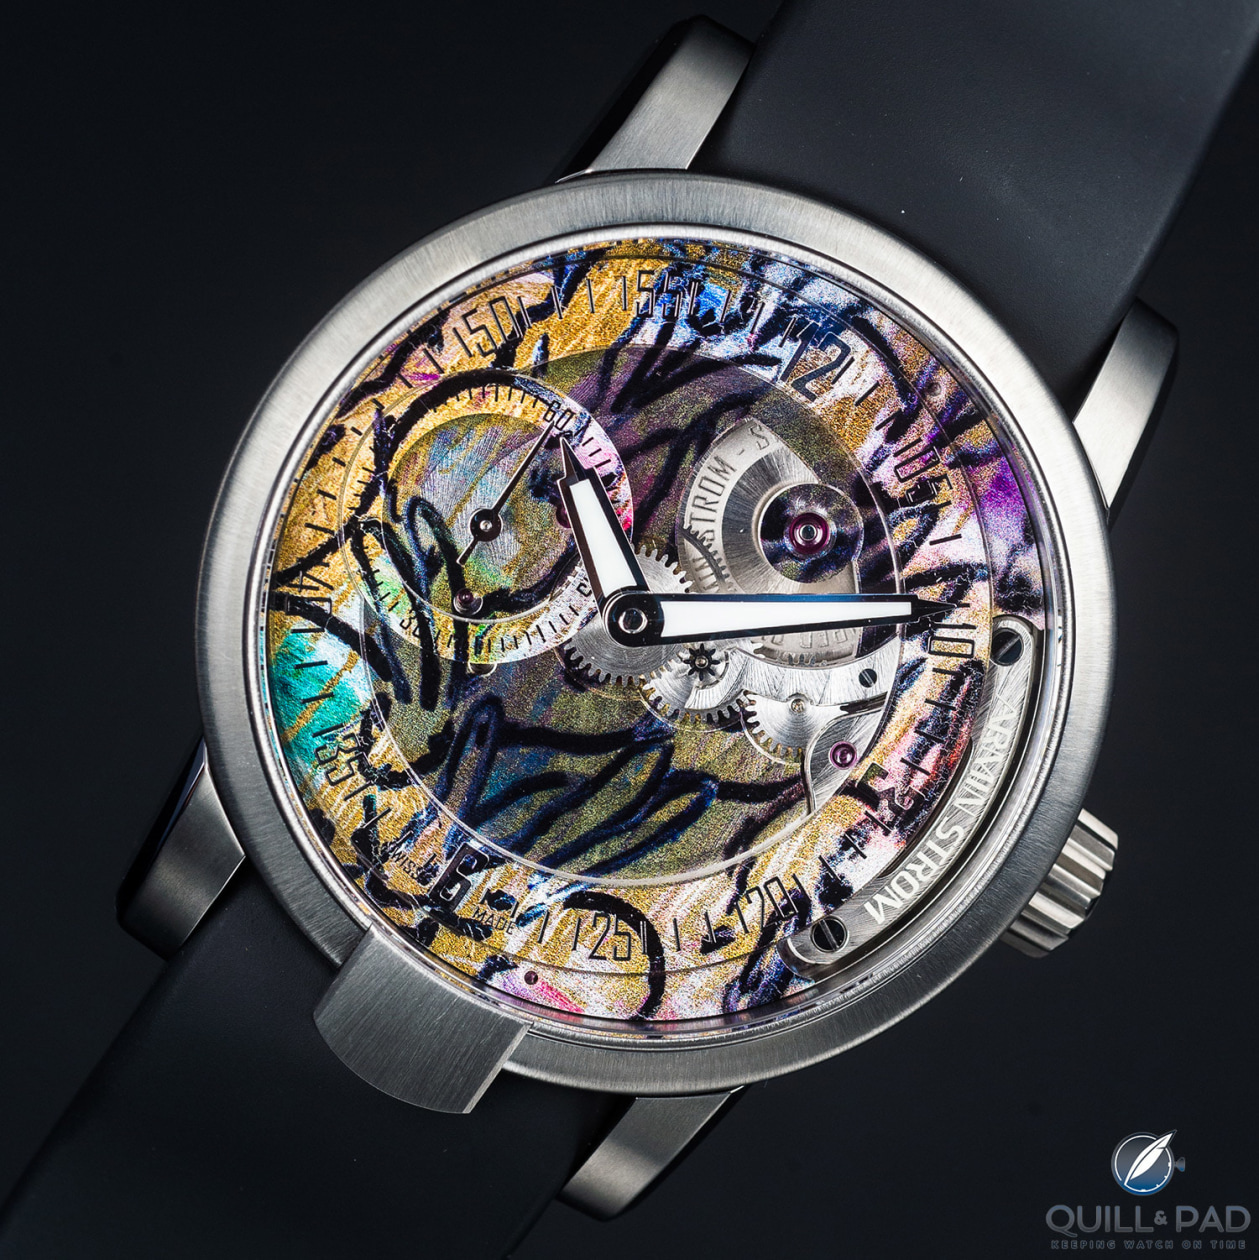 Armin Strom Manual Hunt Slonem Edition For Only Watch 2017: Artfully Neo-Expressionist And Definitely Unique